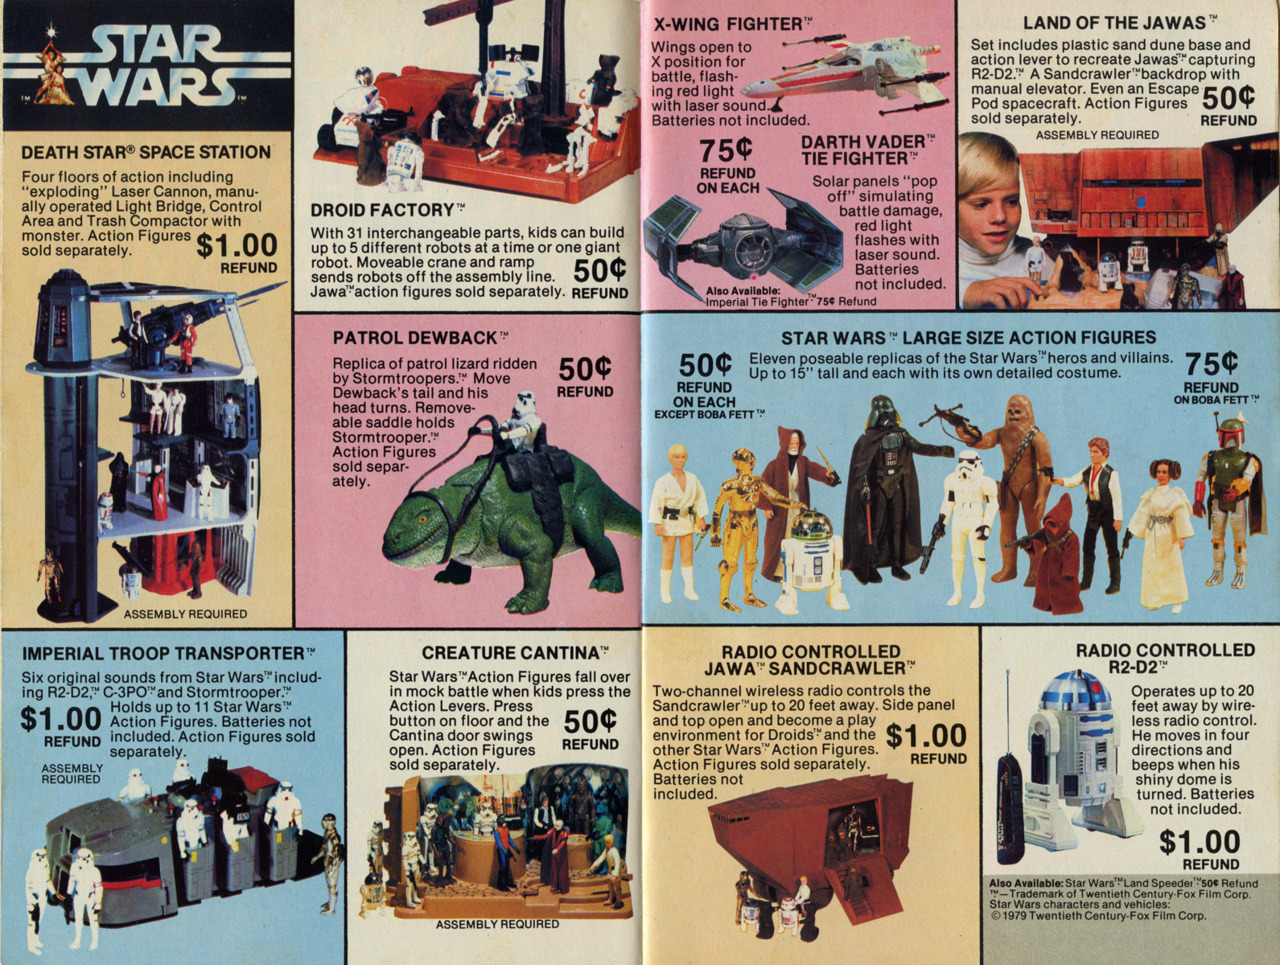 retrostarwars:
“The only thing better than Star Wars toys is a bargain.
”